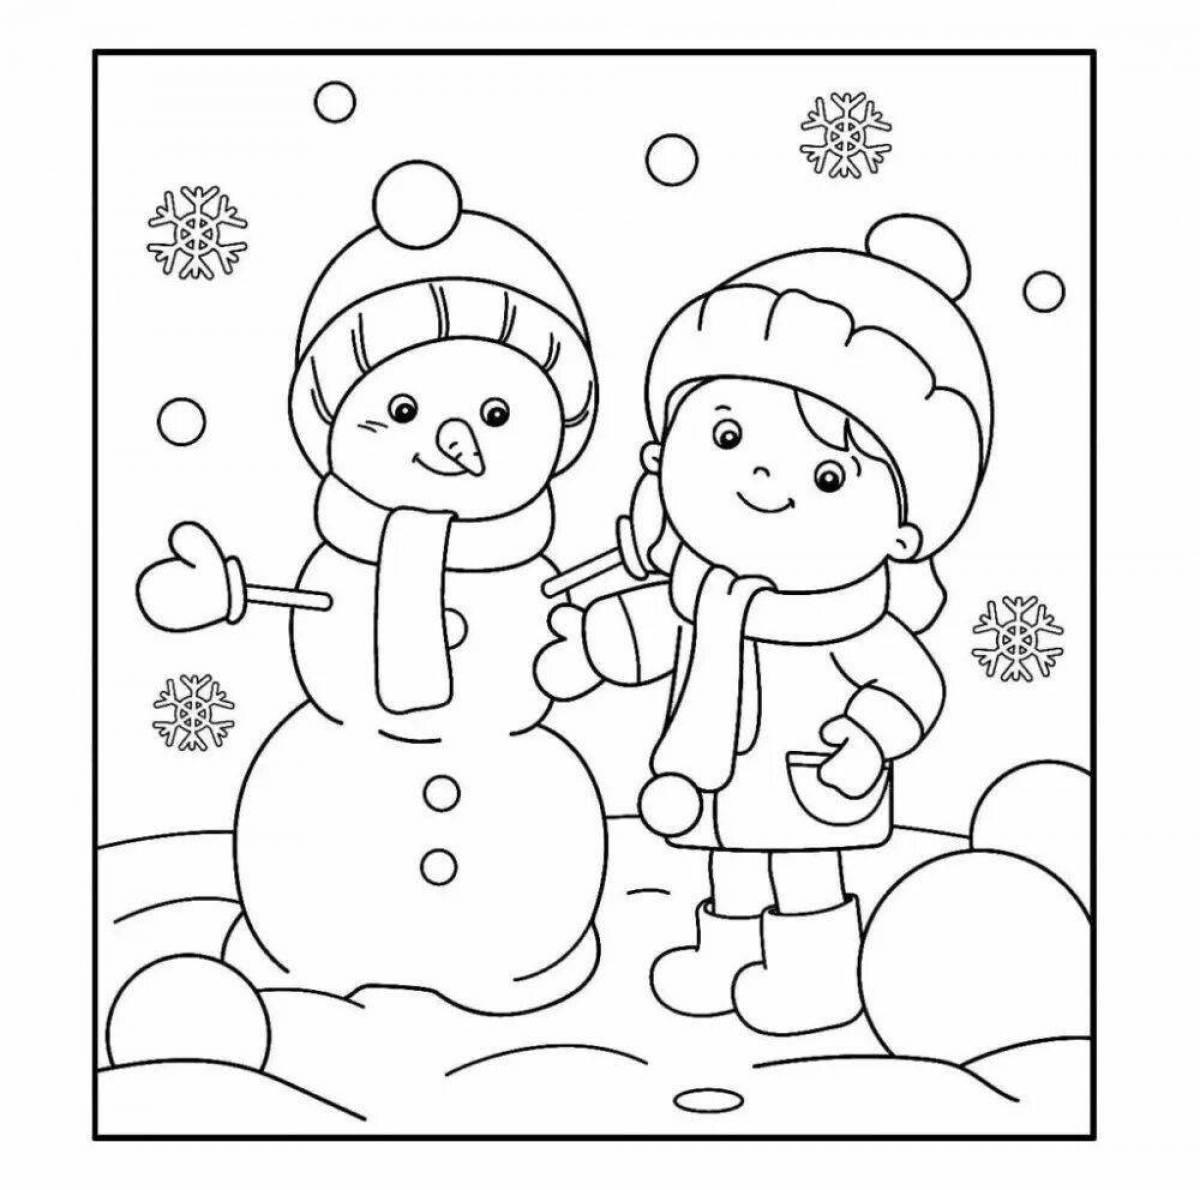 Coloring page adorable snowman girl